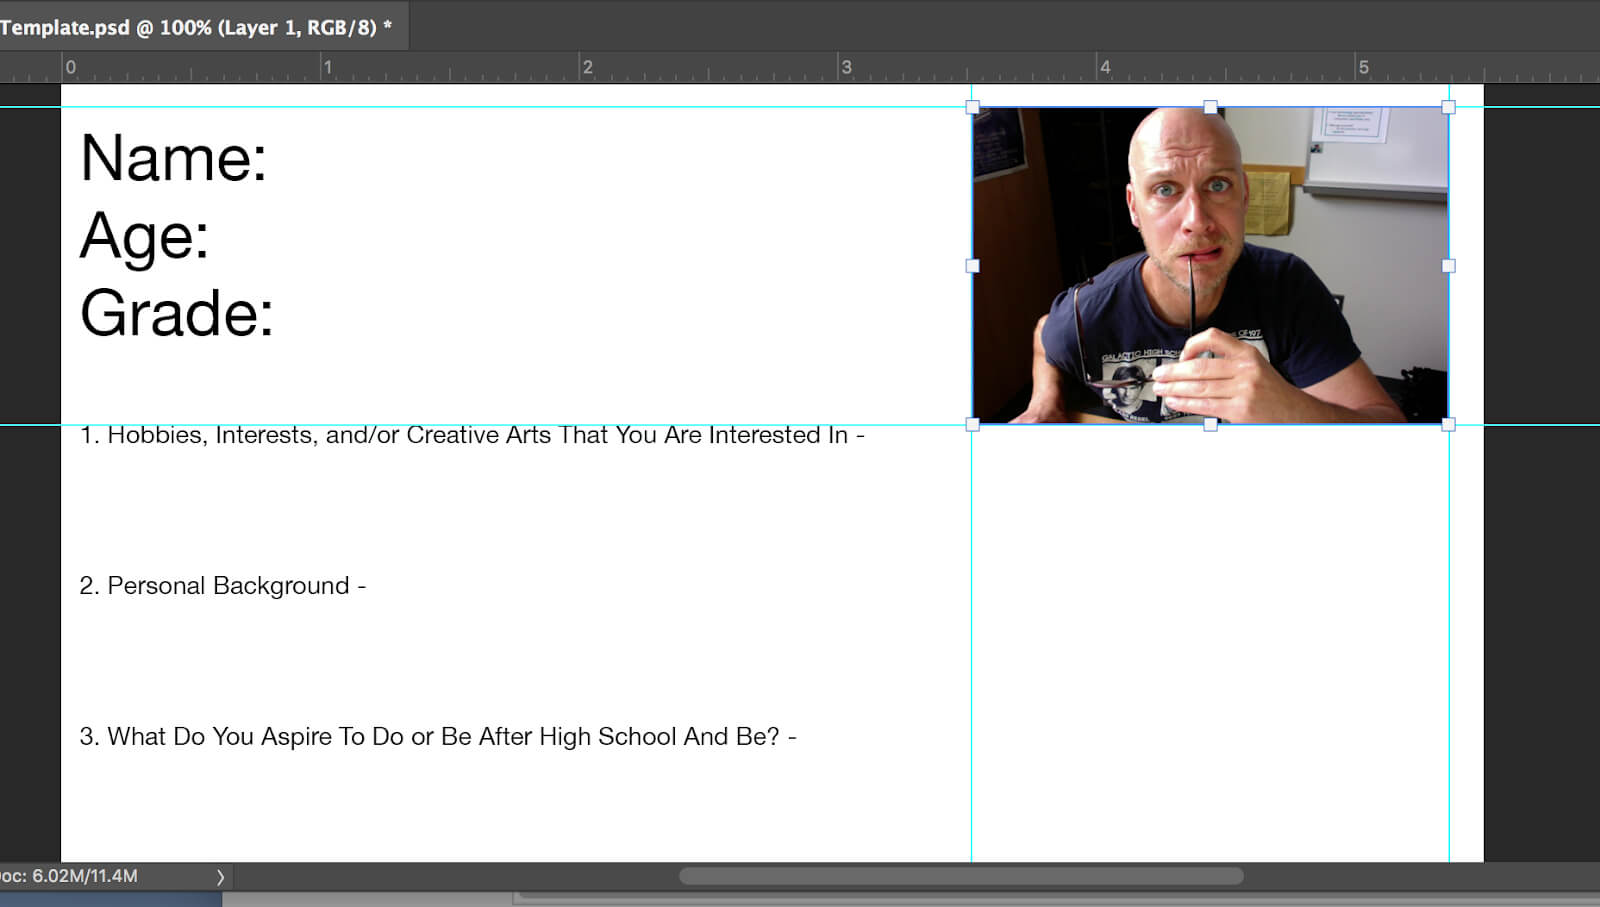 Working With Layers In Photoshop Cc To Build Your Punkt Id Card Regarding High School Id Card Template